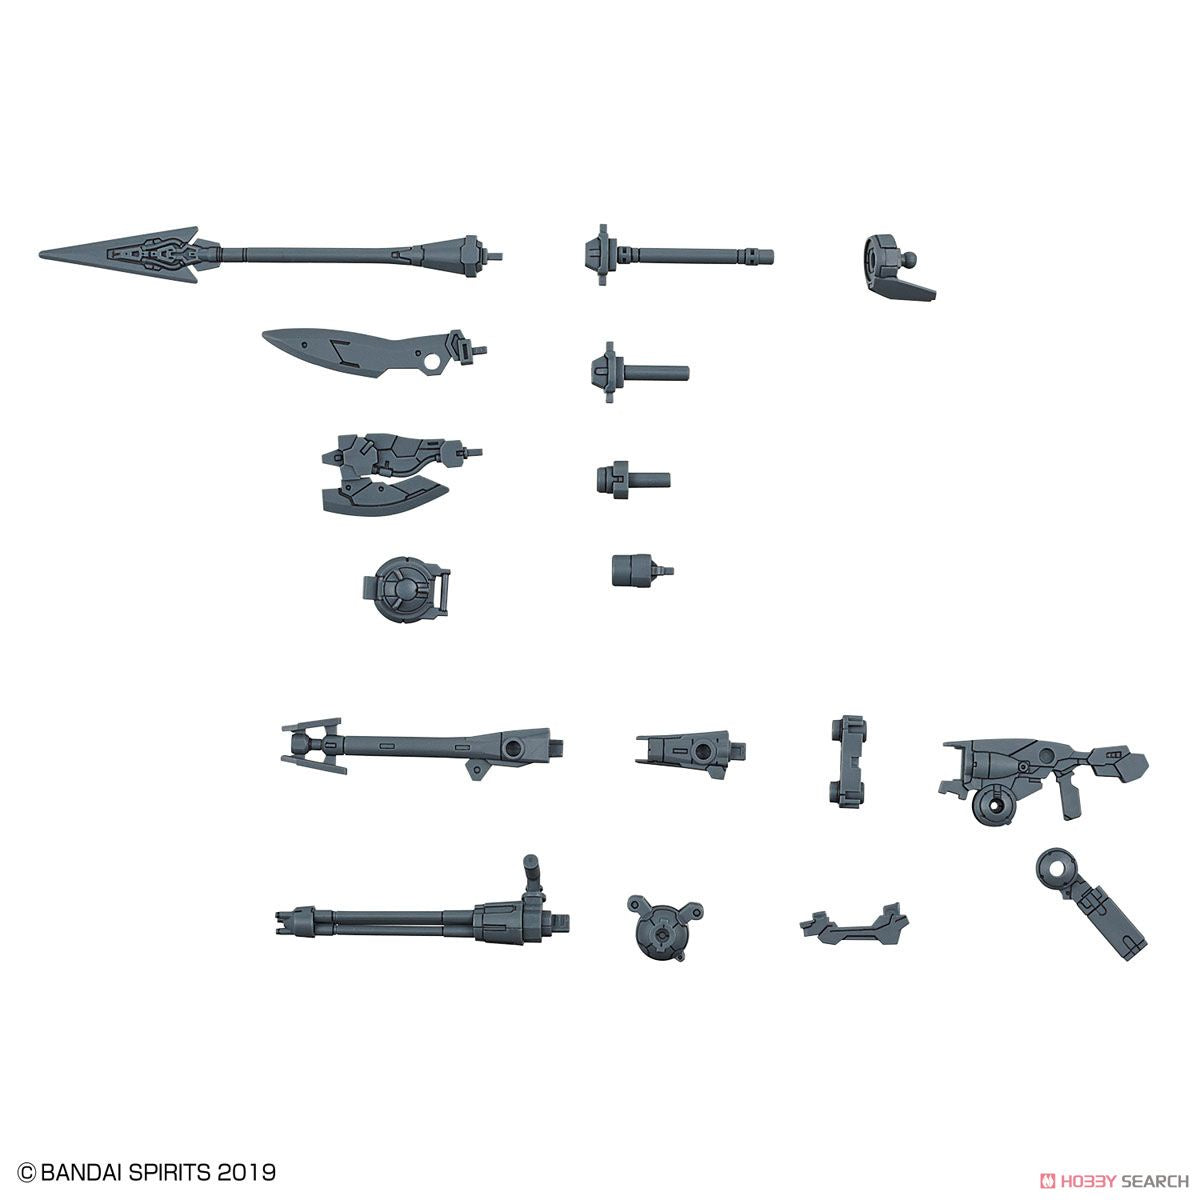 Option Weapon 1 for Portanova 30 Minutes Missions Accessory Model Kit #5057814 by Bandai